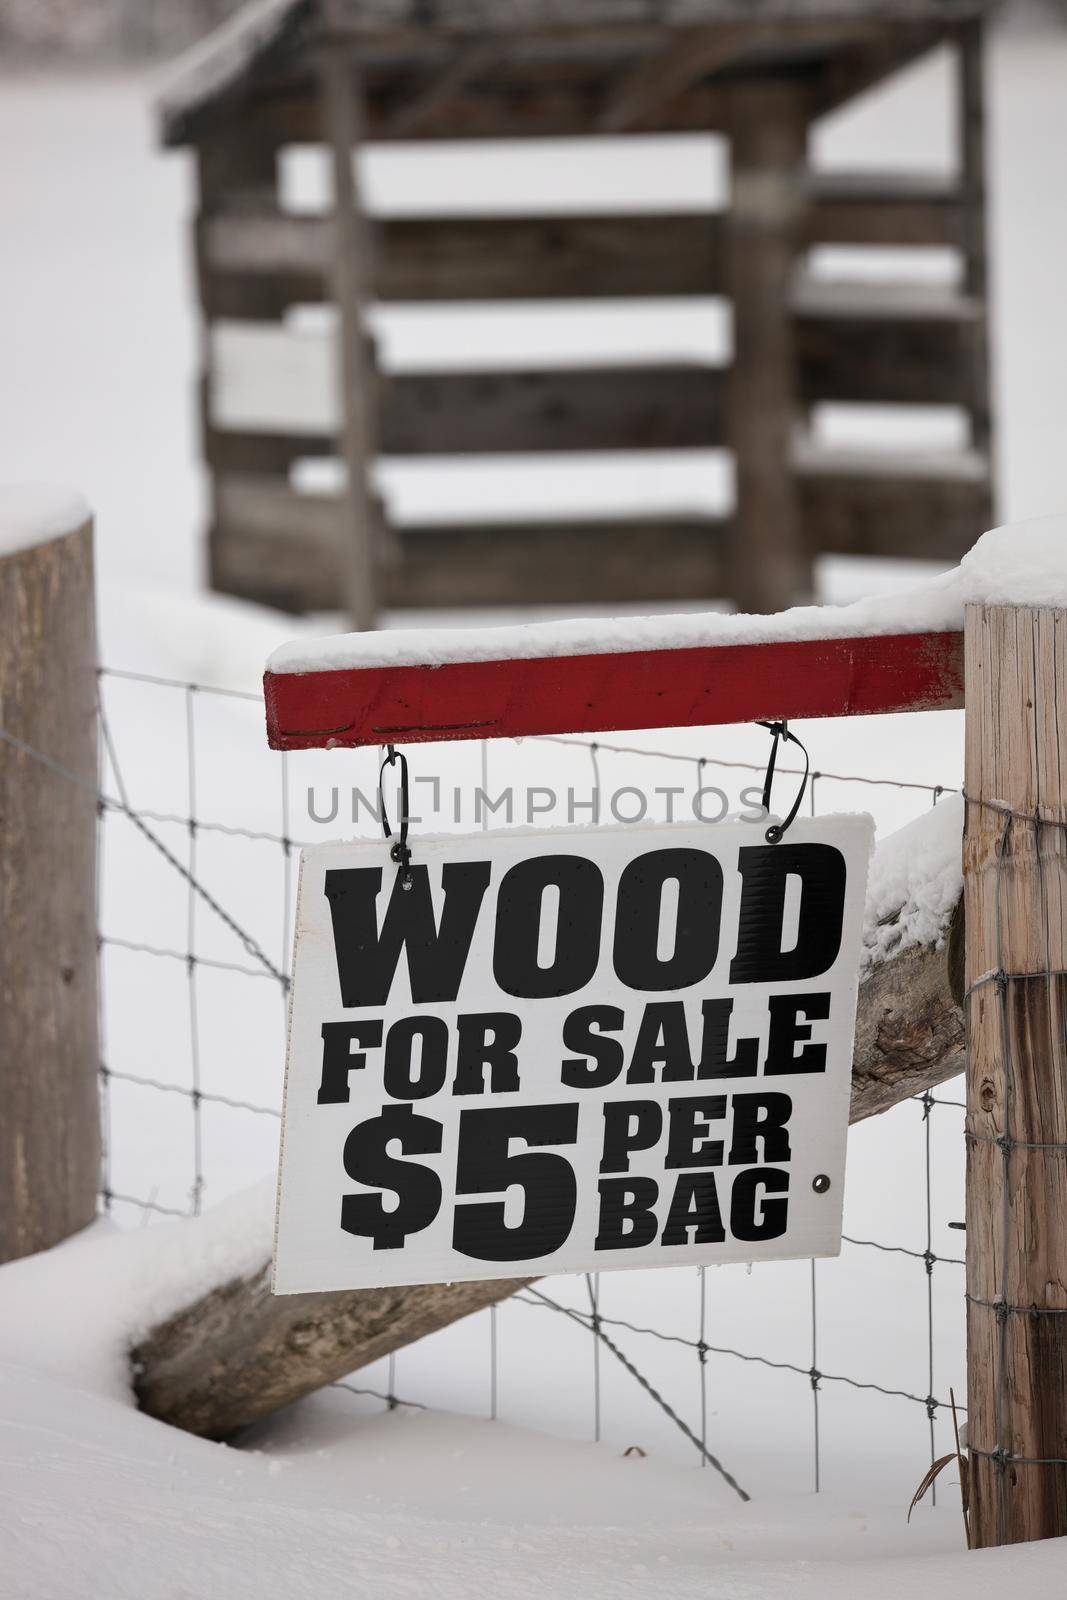 A Firewood for Sale Sign in a rural setting by markvandam